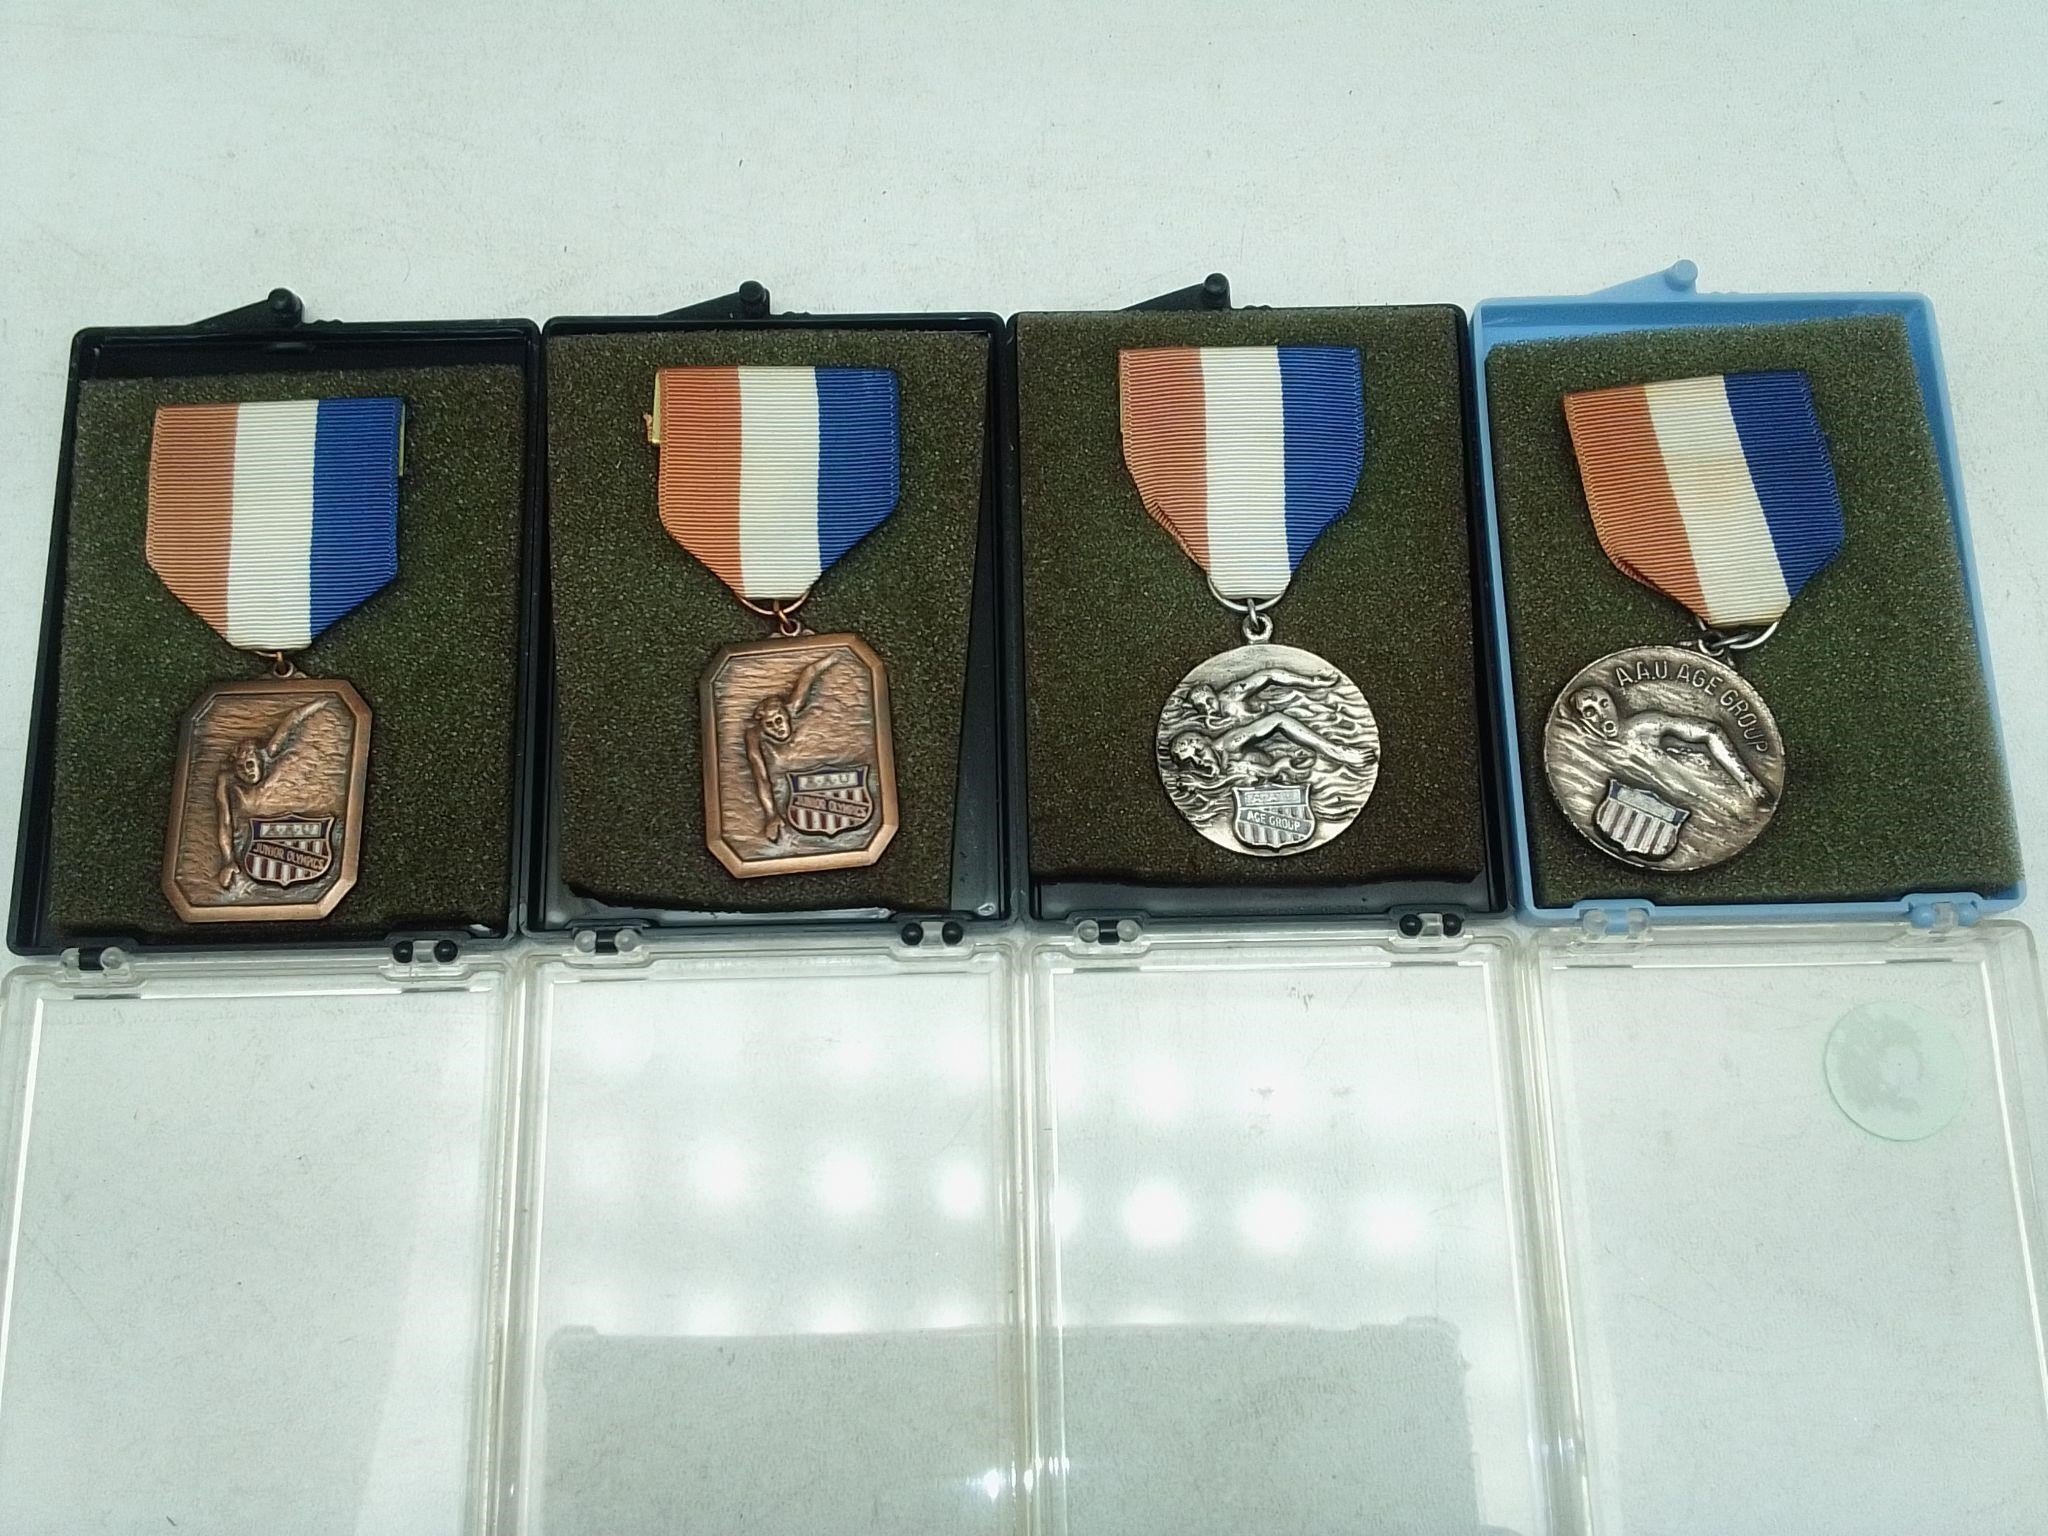 4- 1960'S AAU JR OLYMPICS MEDALS FOR SWIMMING